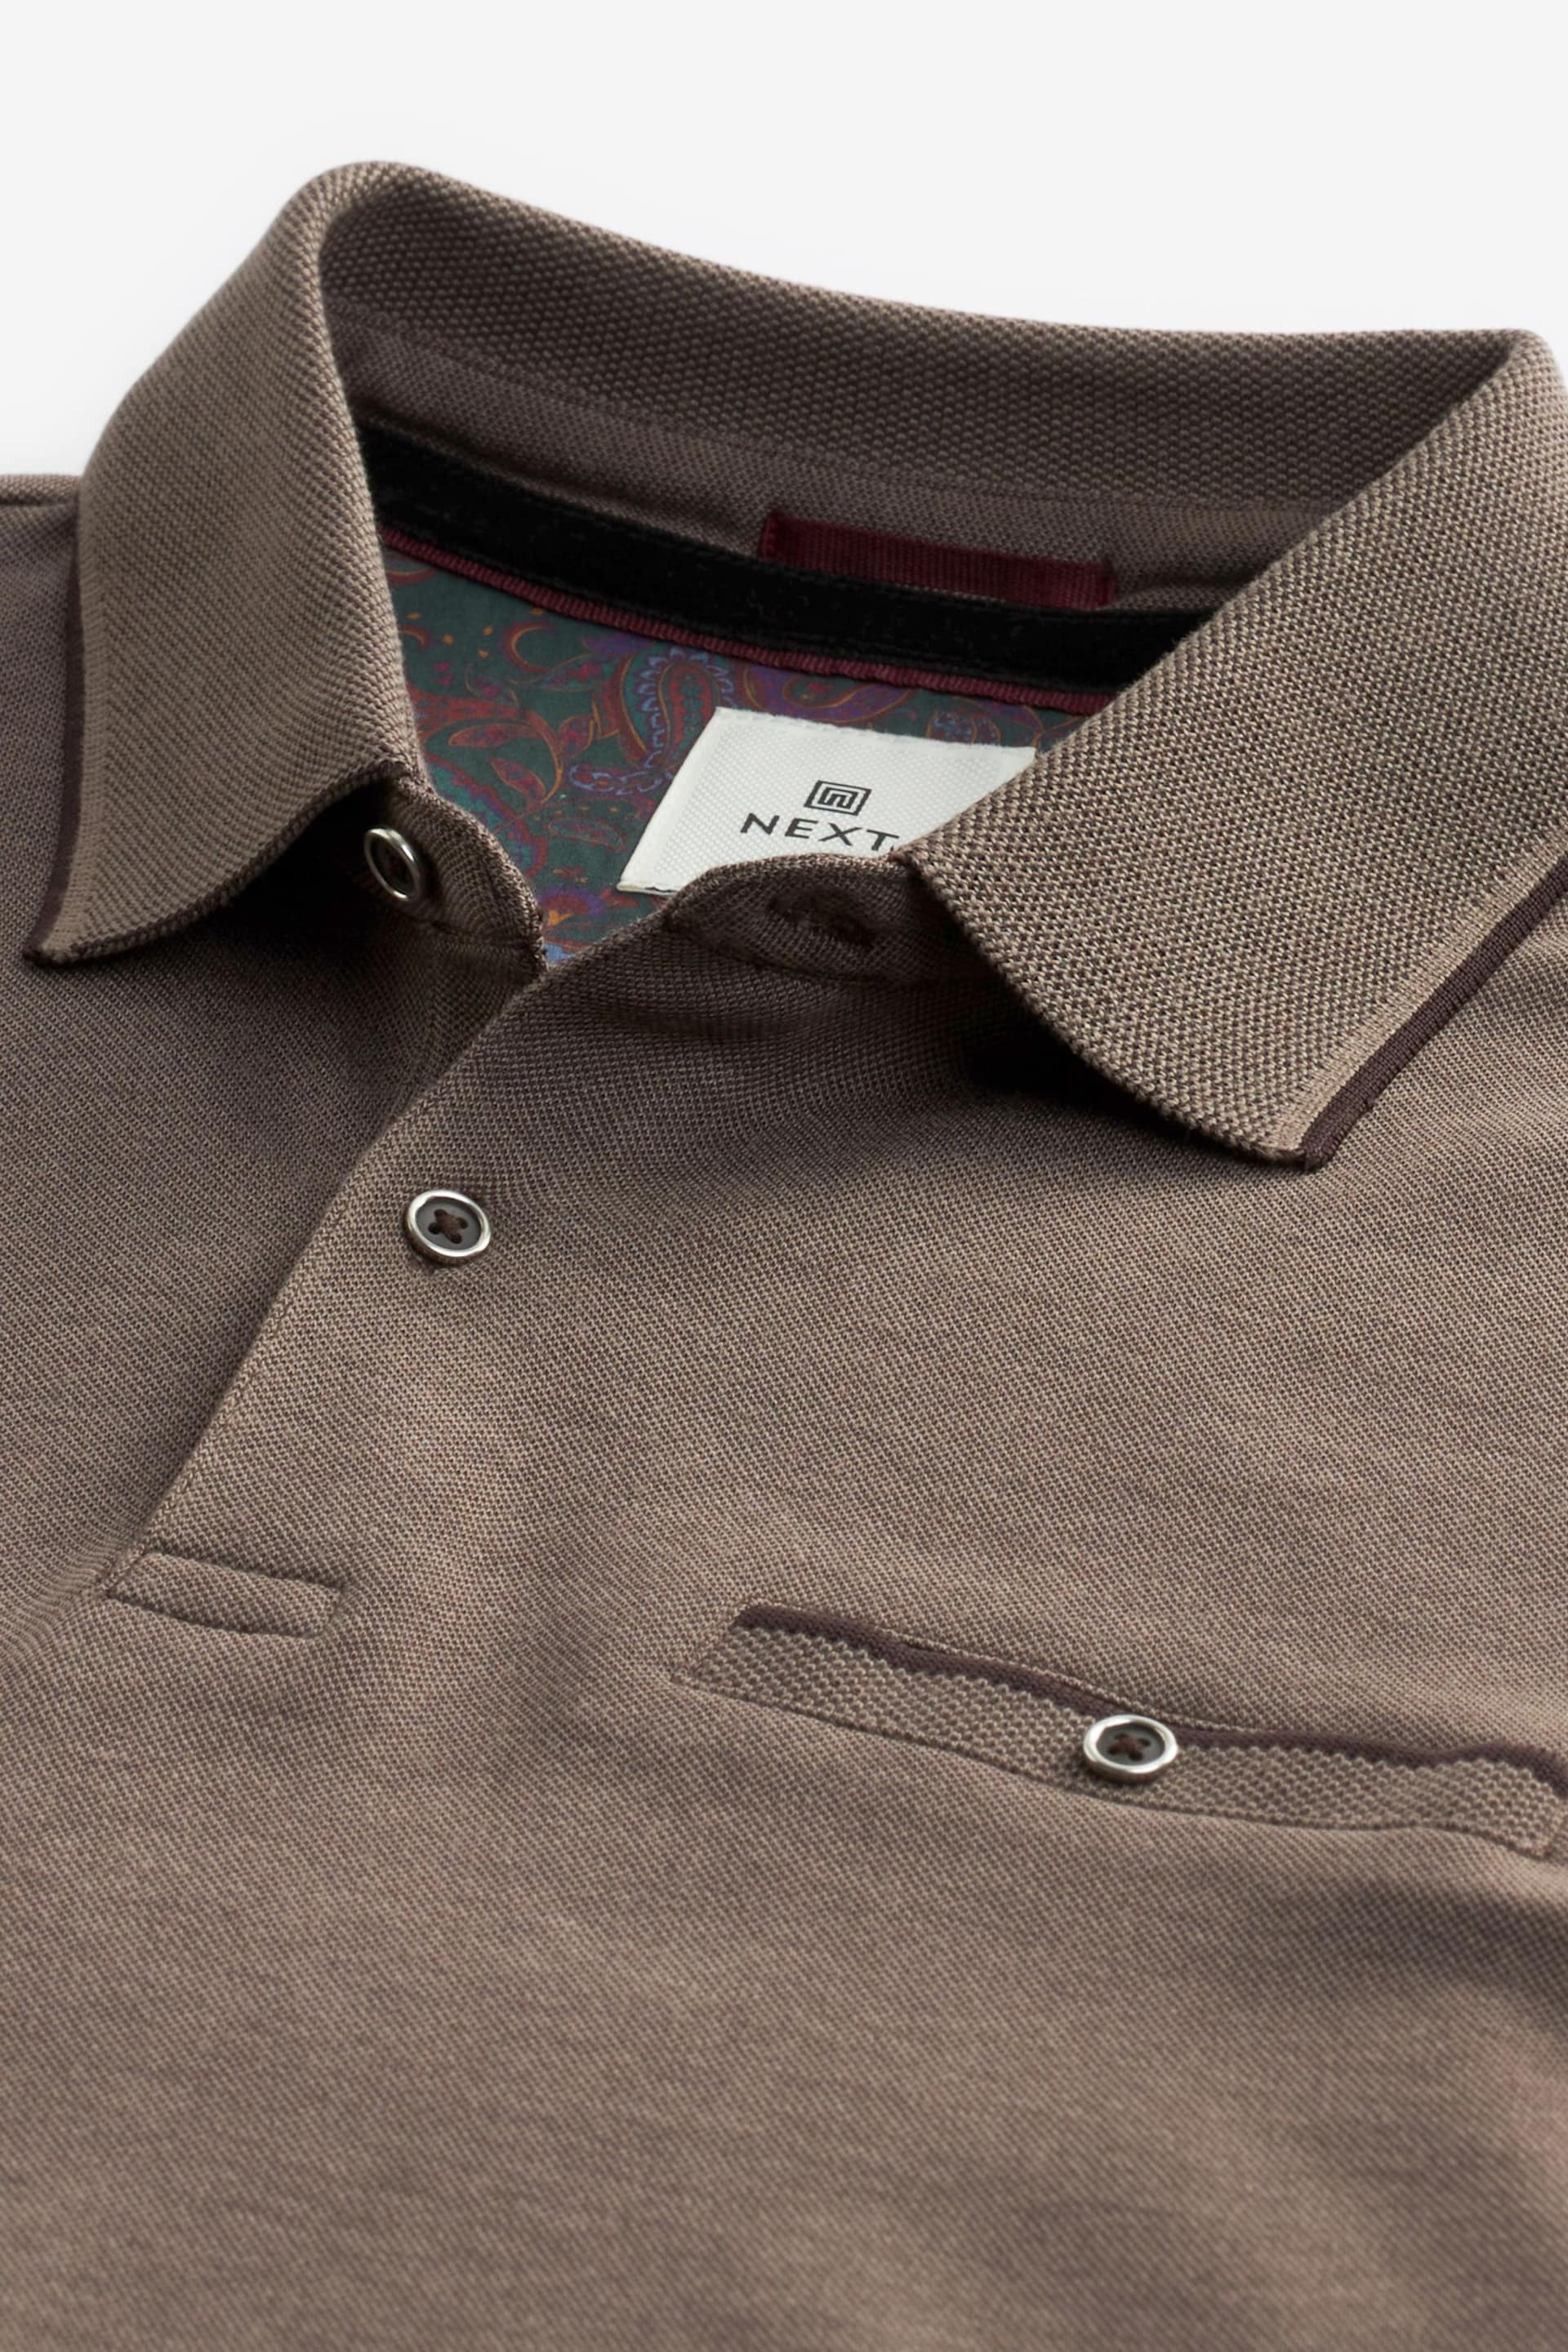 Neutral Brown Oxford Long Sleeve Pique Polo Shirt - Image 7 of 8